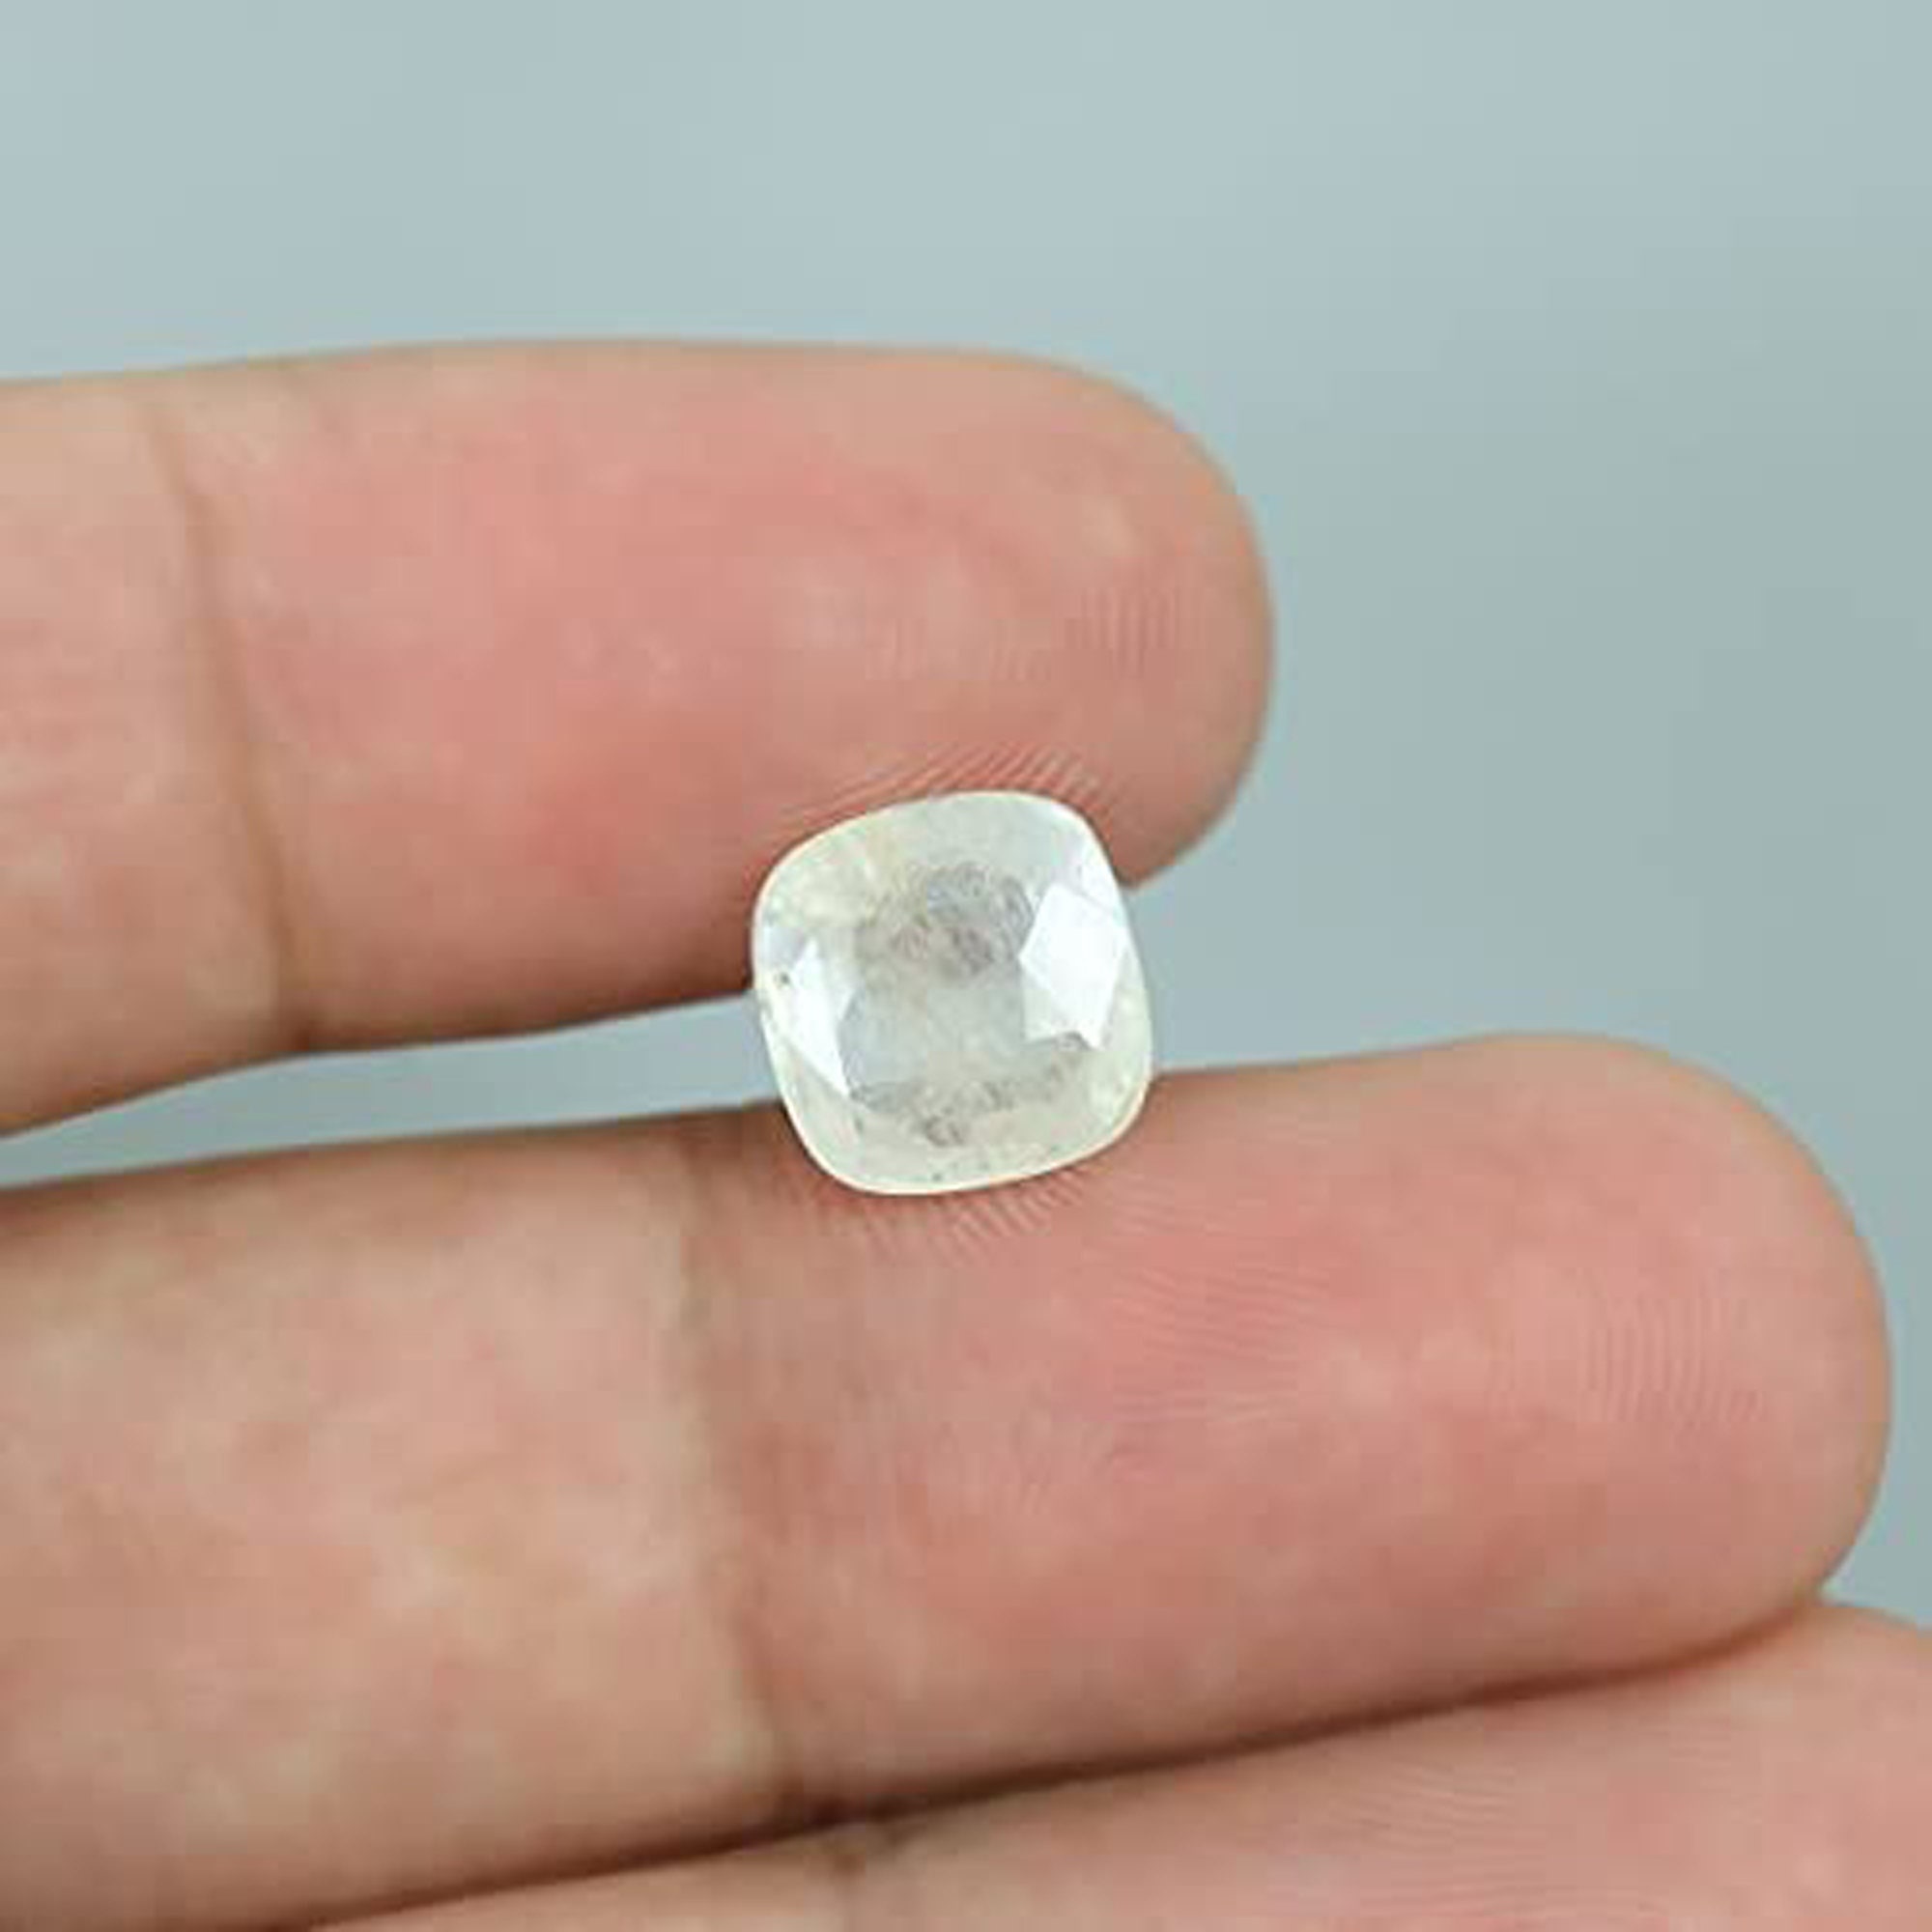 White Sapphire - Buy Safed Pukhraj Stone at Best Price in India